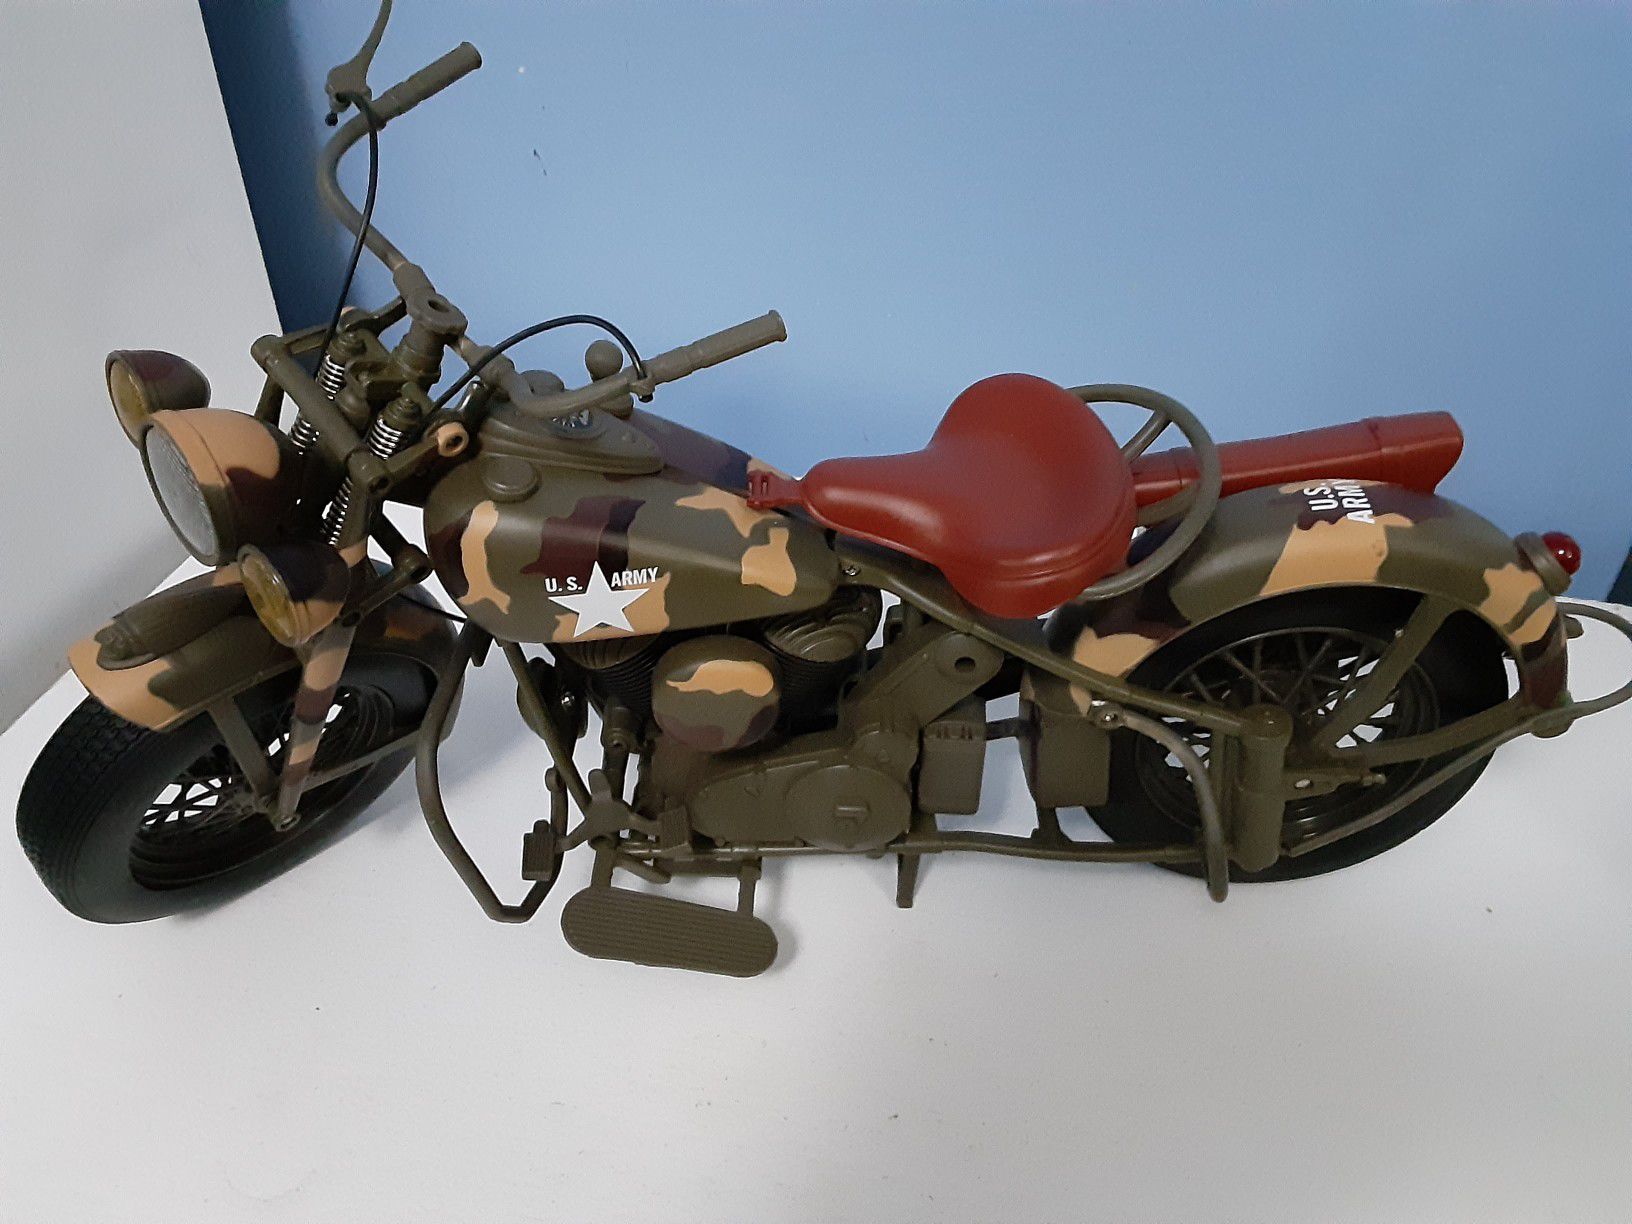 1998 INDIAN CHIEF IMMI SCALE 1/6 MOTORCYCLE